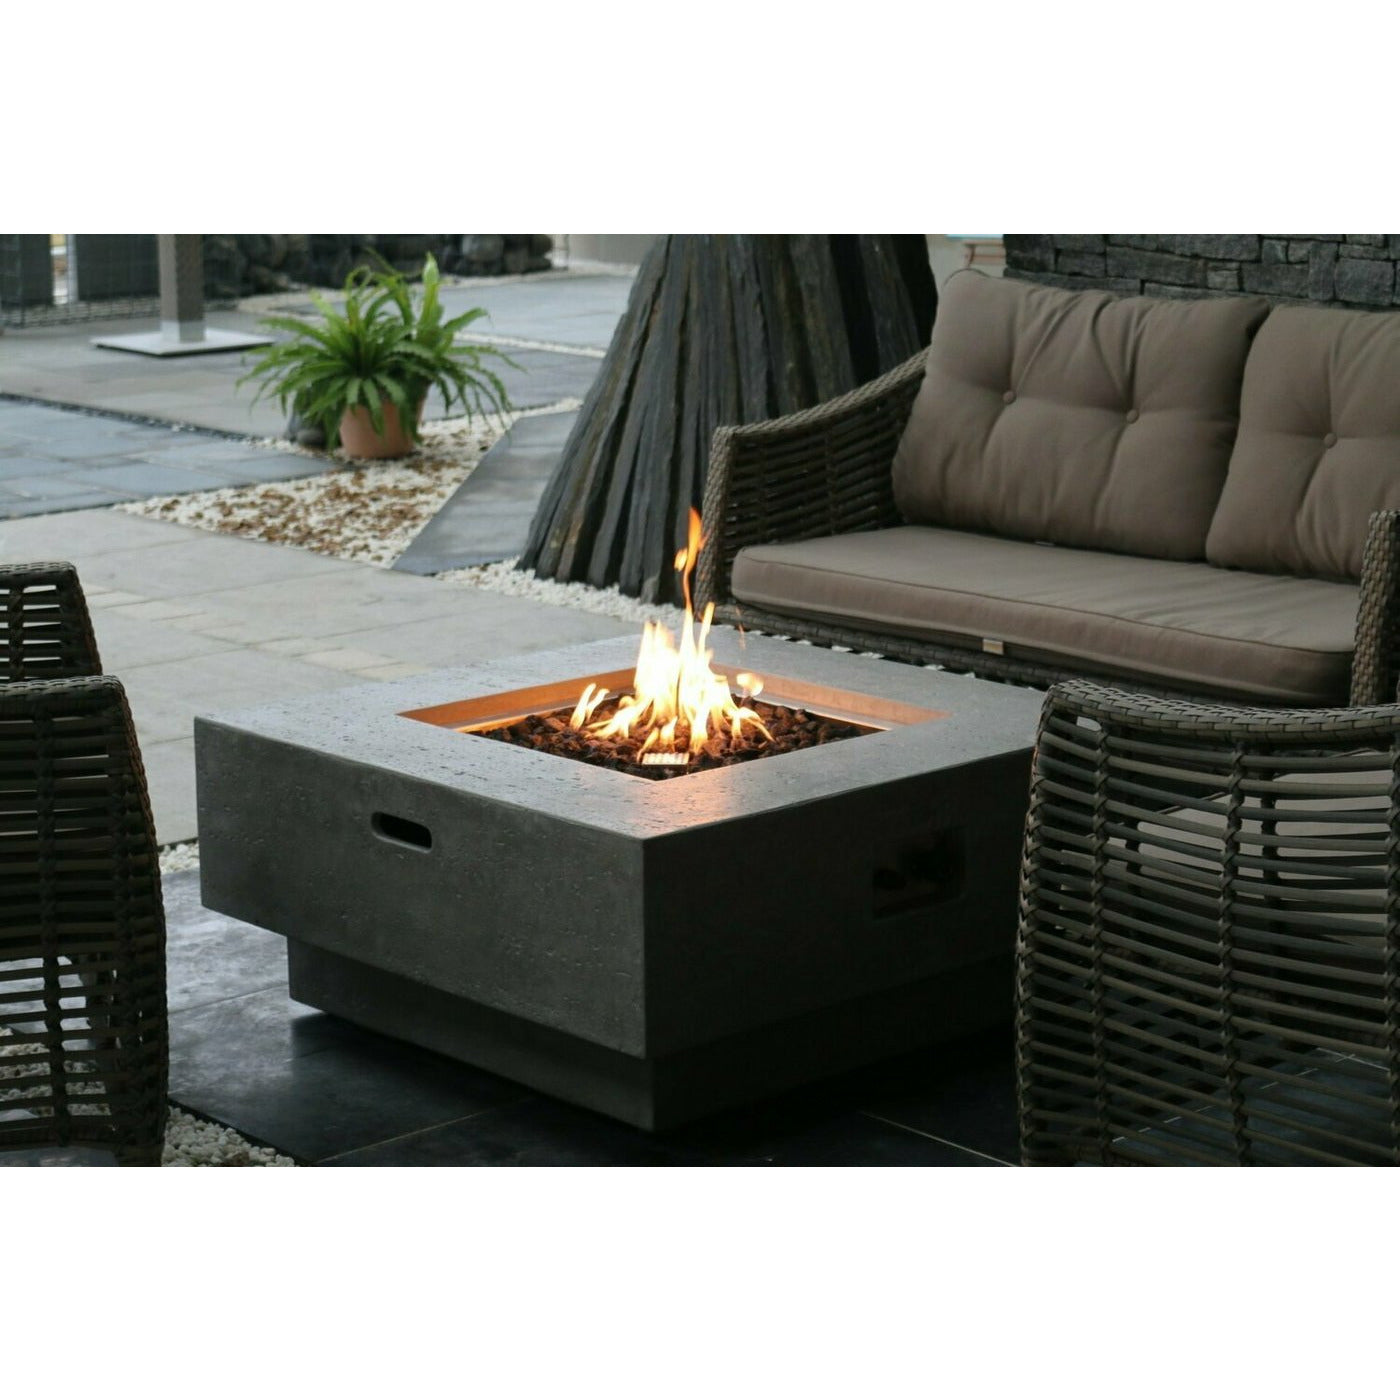 Elementi Manhattan Fire Table for Liquid Propane Gas or Natural Gas in Light Grey (Includes Canvas Cover) - PadioLiving - Elementi Manhattan Fire Table for Liquid Propane Gas or Natural Gas in Light Grey (Includes Canvas Cover) - Fire Pit - PadioLiving